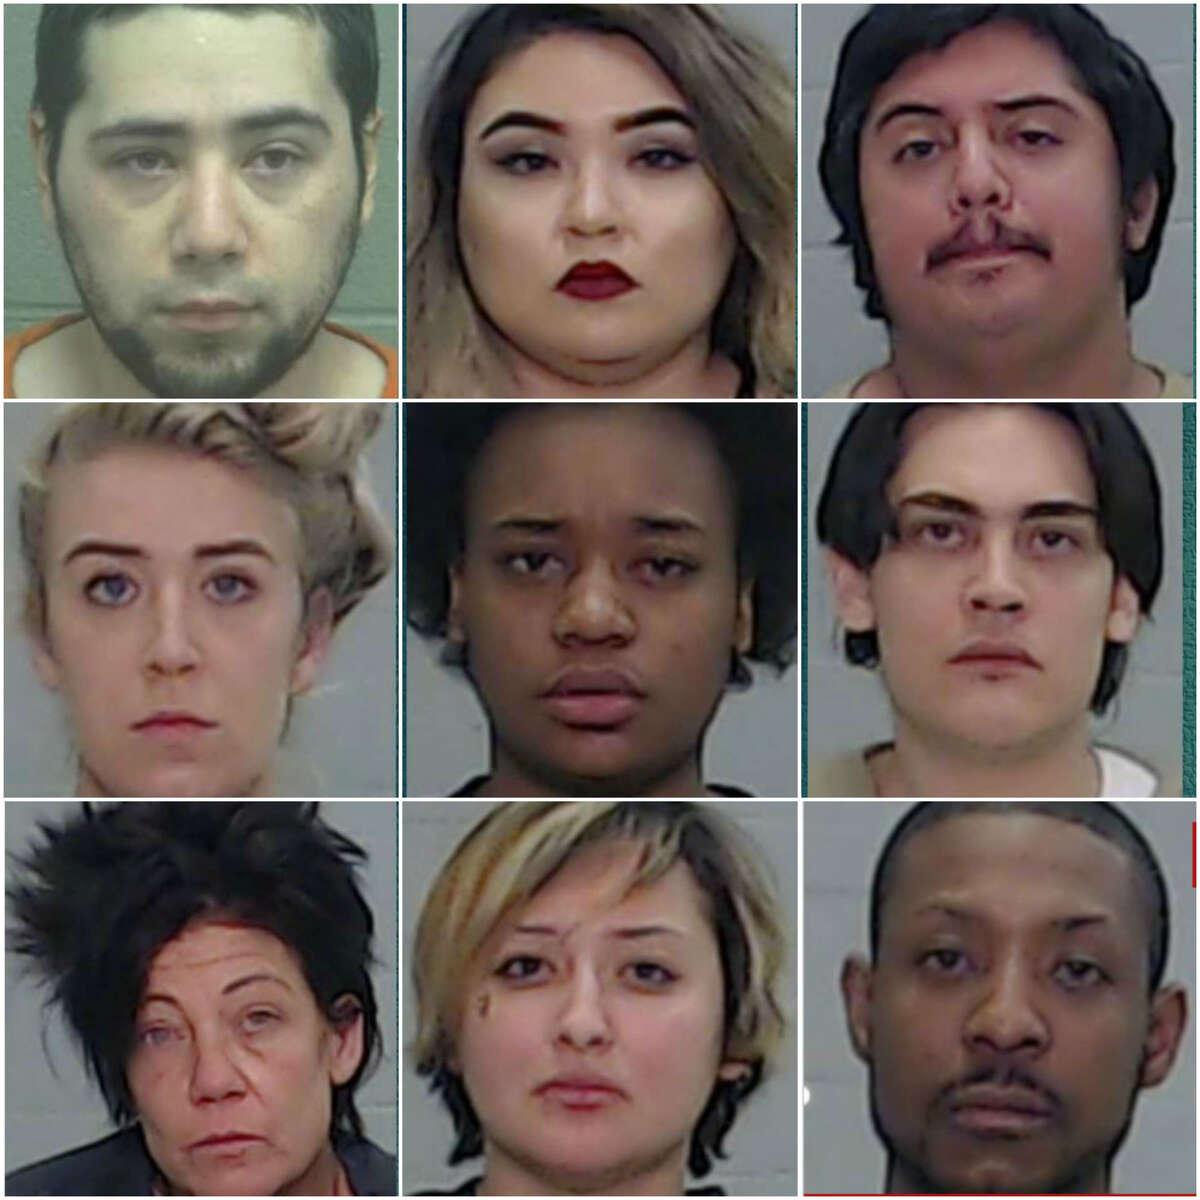 >> See the mugshots of 62 apprehended in a prostitution sting in Midland and Odessa...